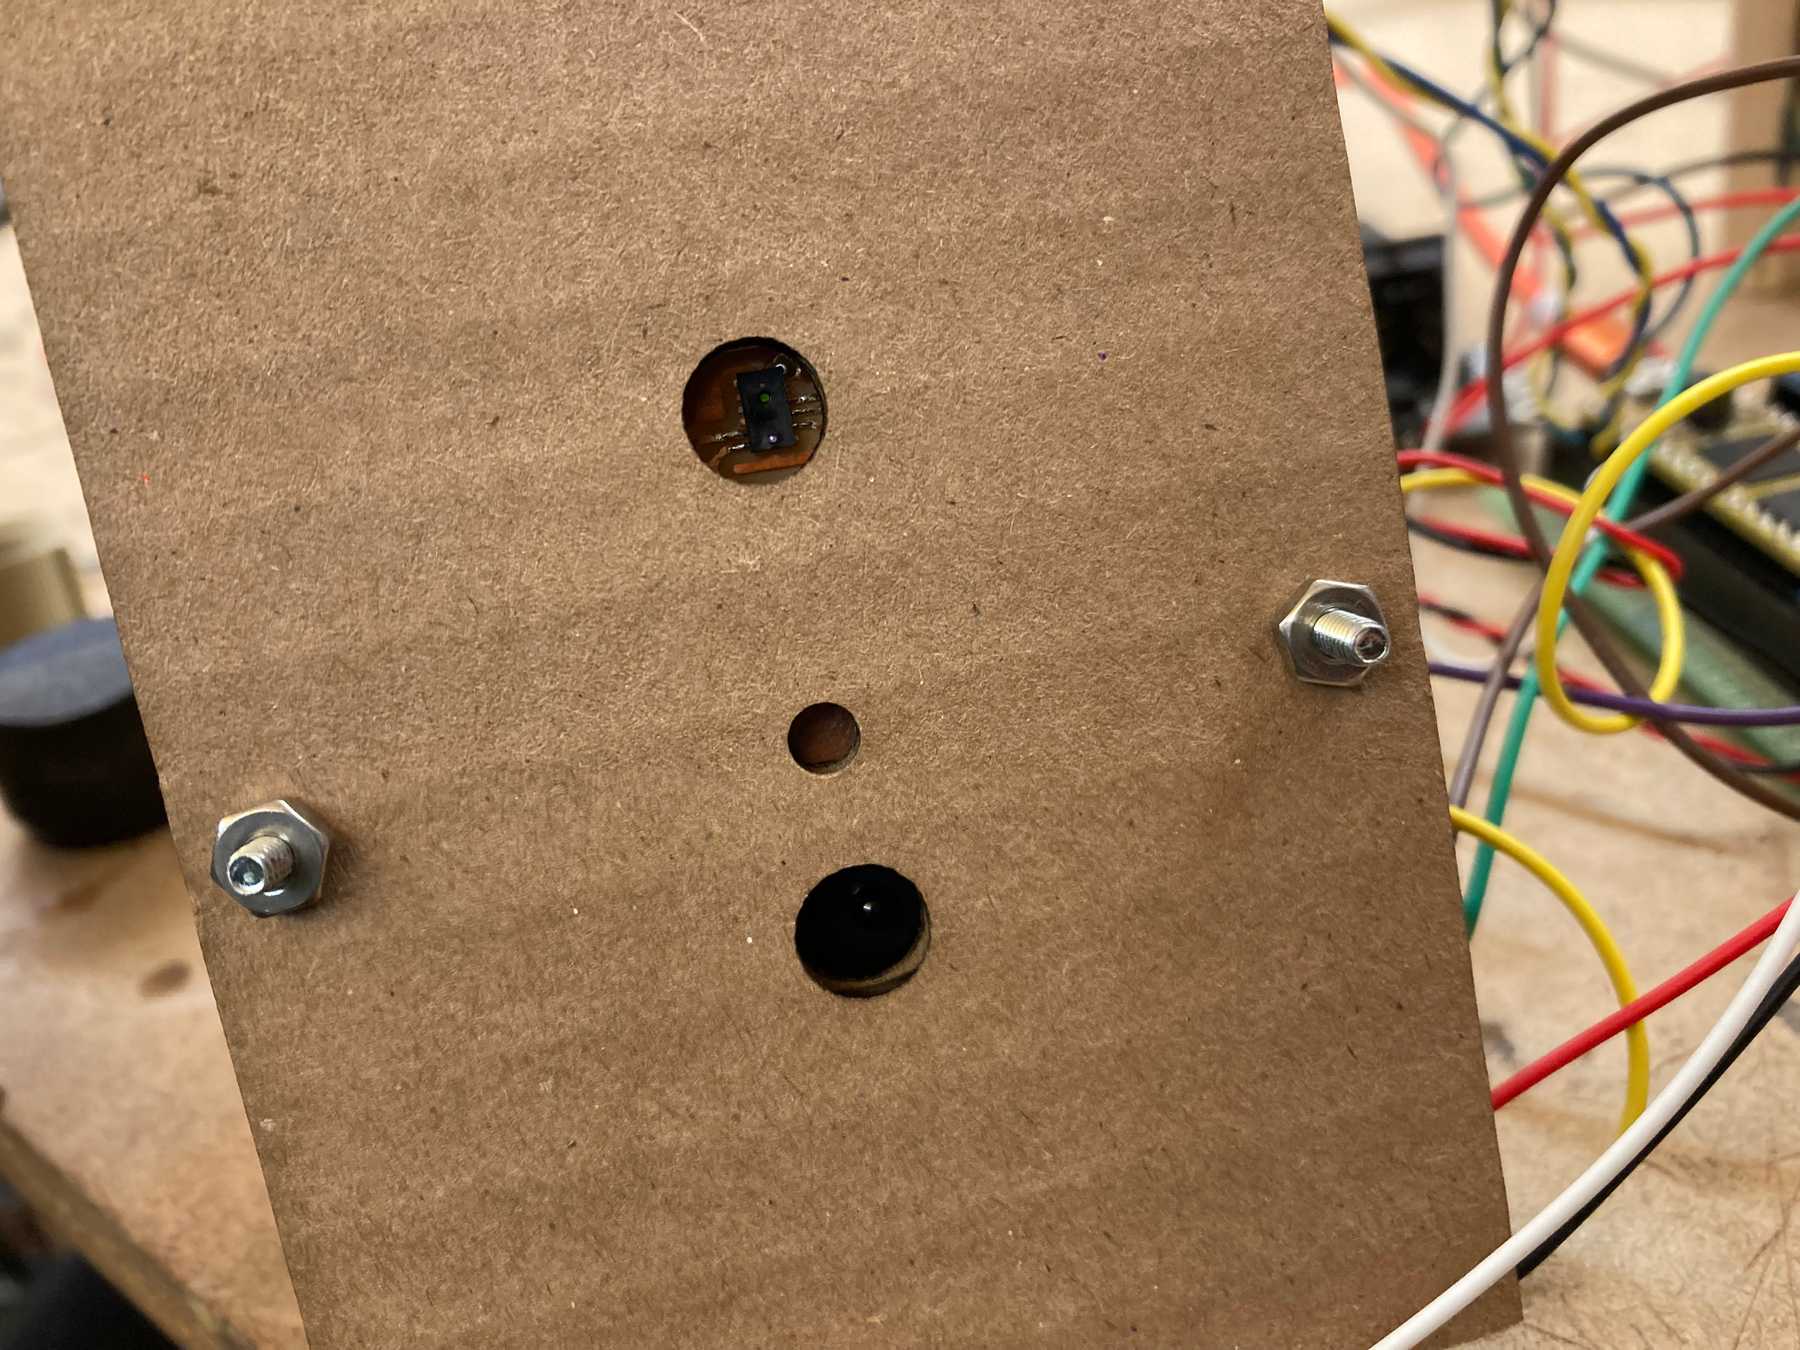 The distance sensor aligns with the hole